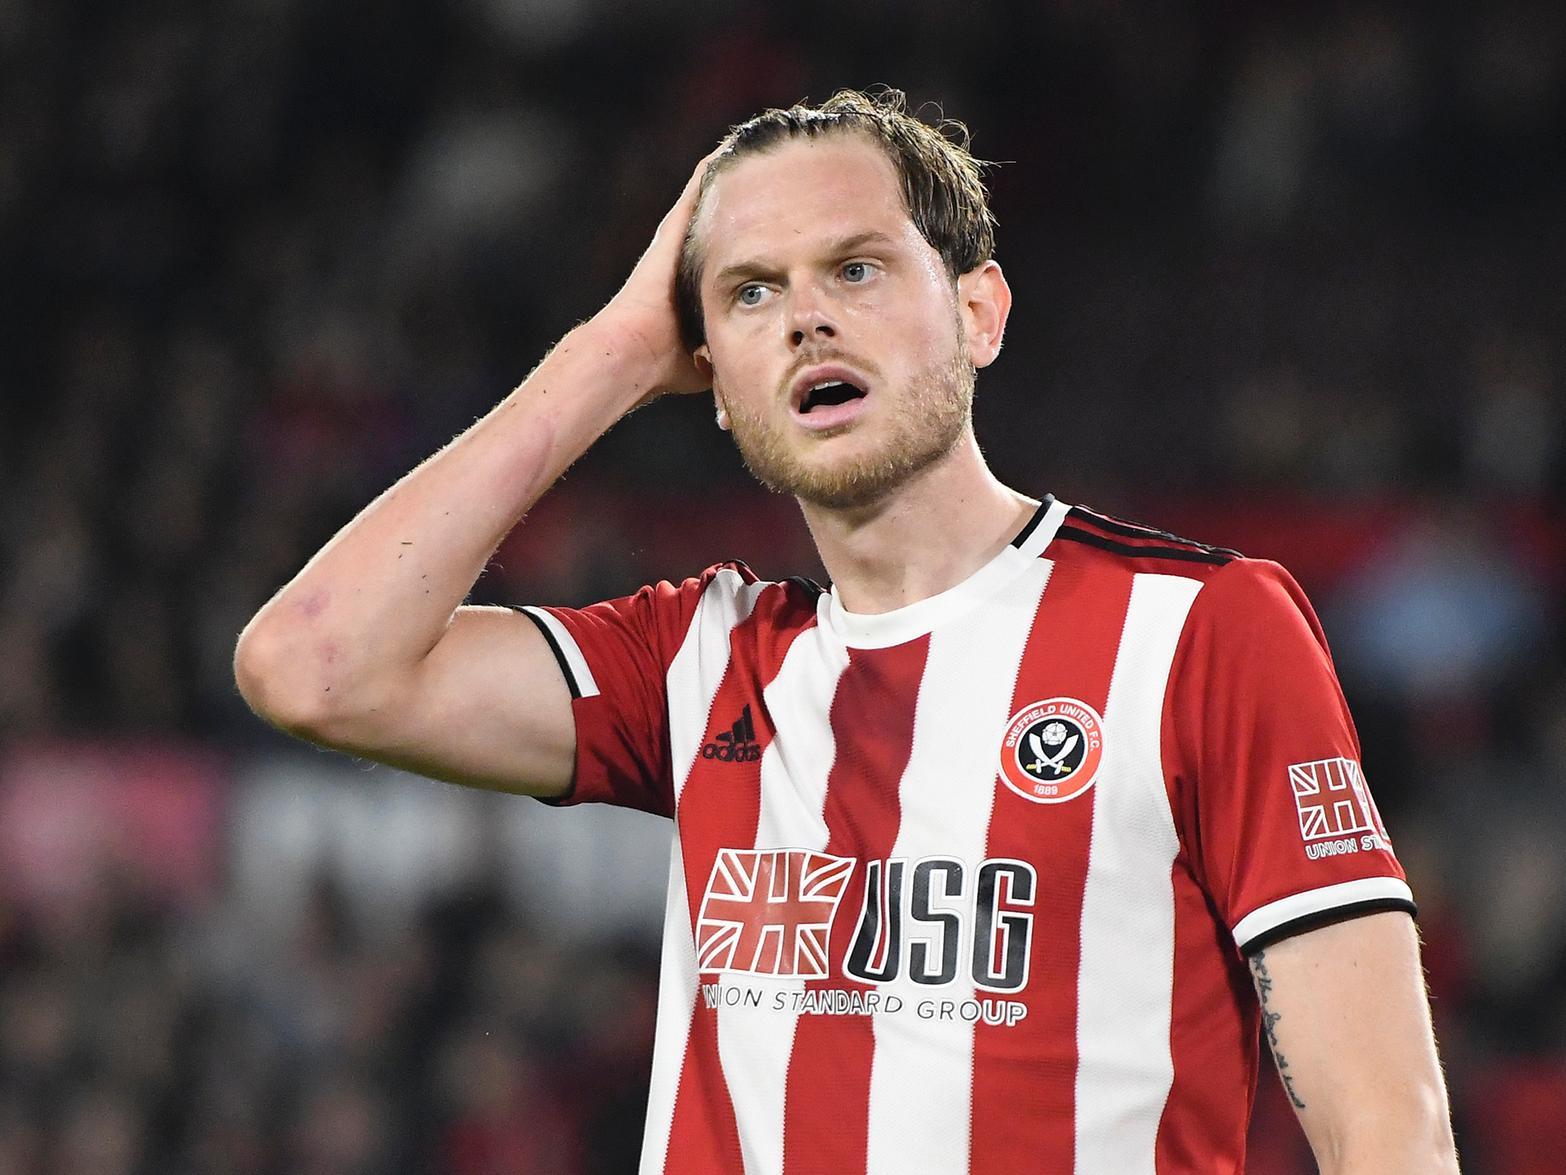 Experienced centre back moved to Huddersfield Town on an 18-month deal after his release from Sheffield United. Former Wolves defender has played three times so far for the Terriers.